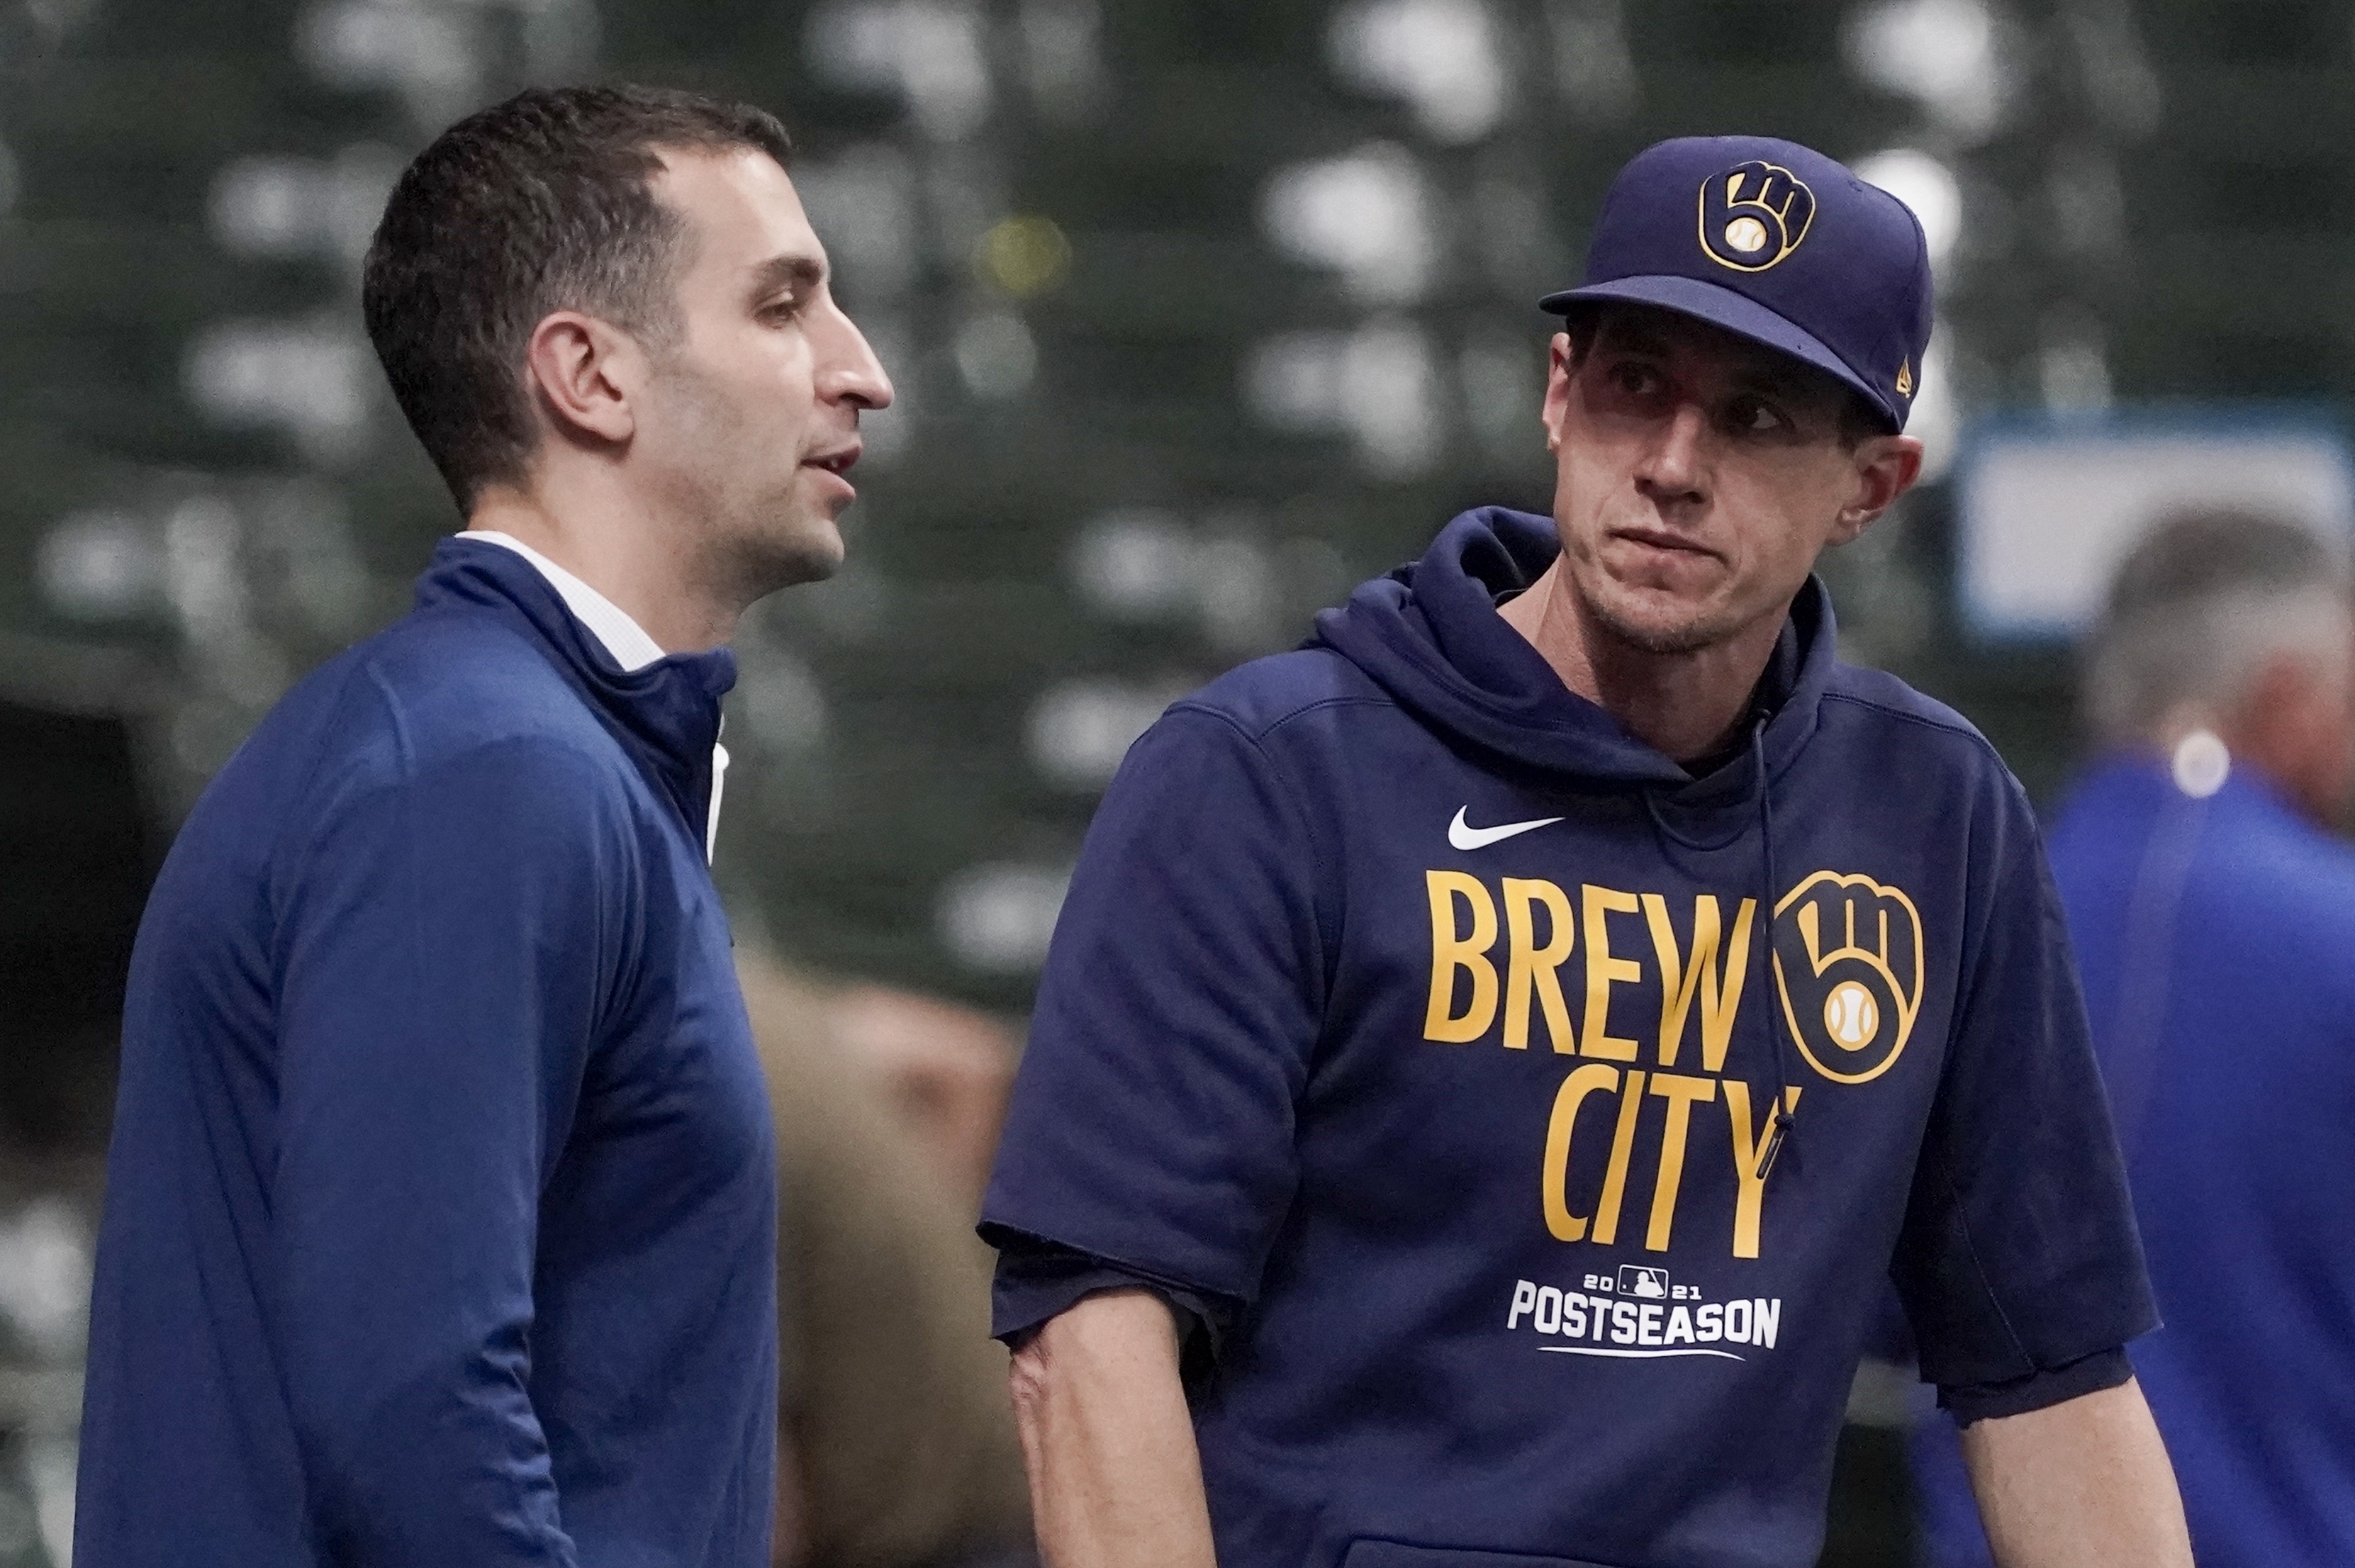 Mets poach David Stearns from the Brewers for new President role